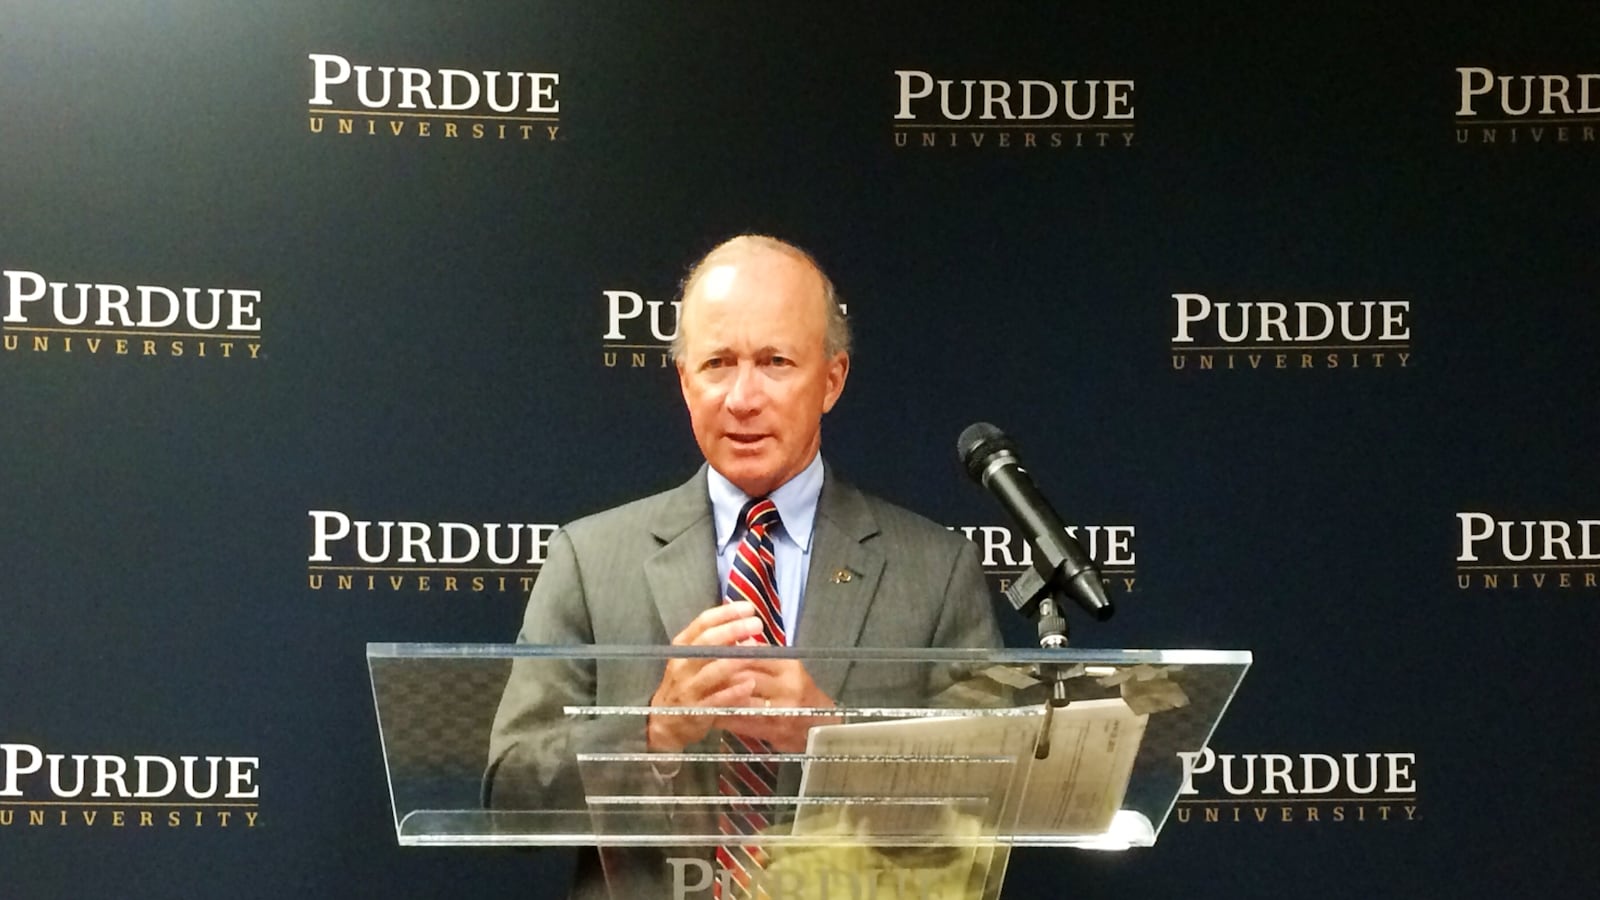 Purdue University President Mitch Daniels announces plans for a Purdue Polytechnic High School in Indianapolis.